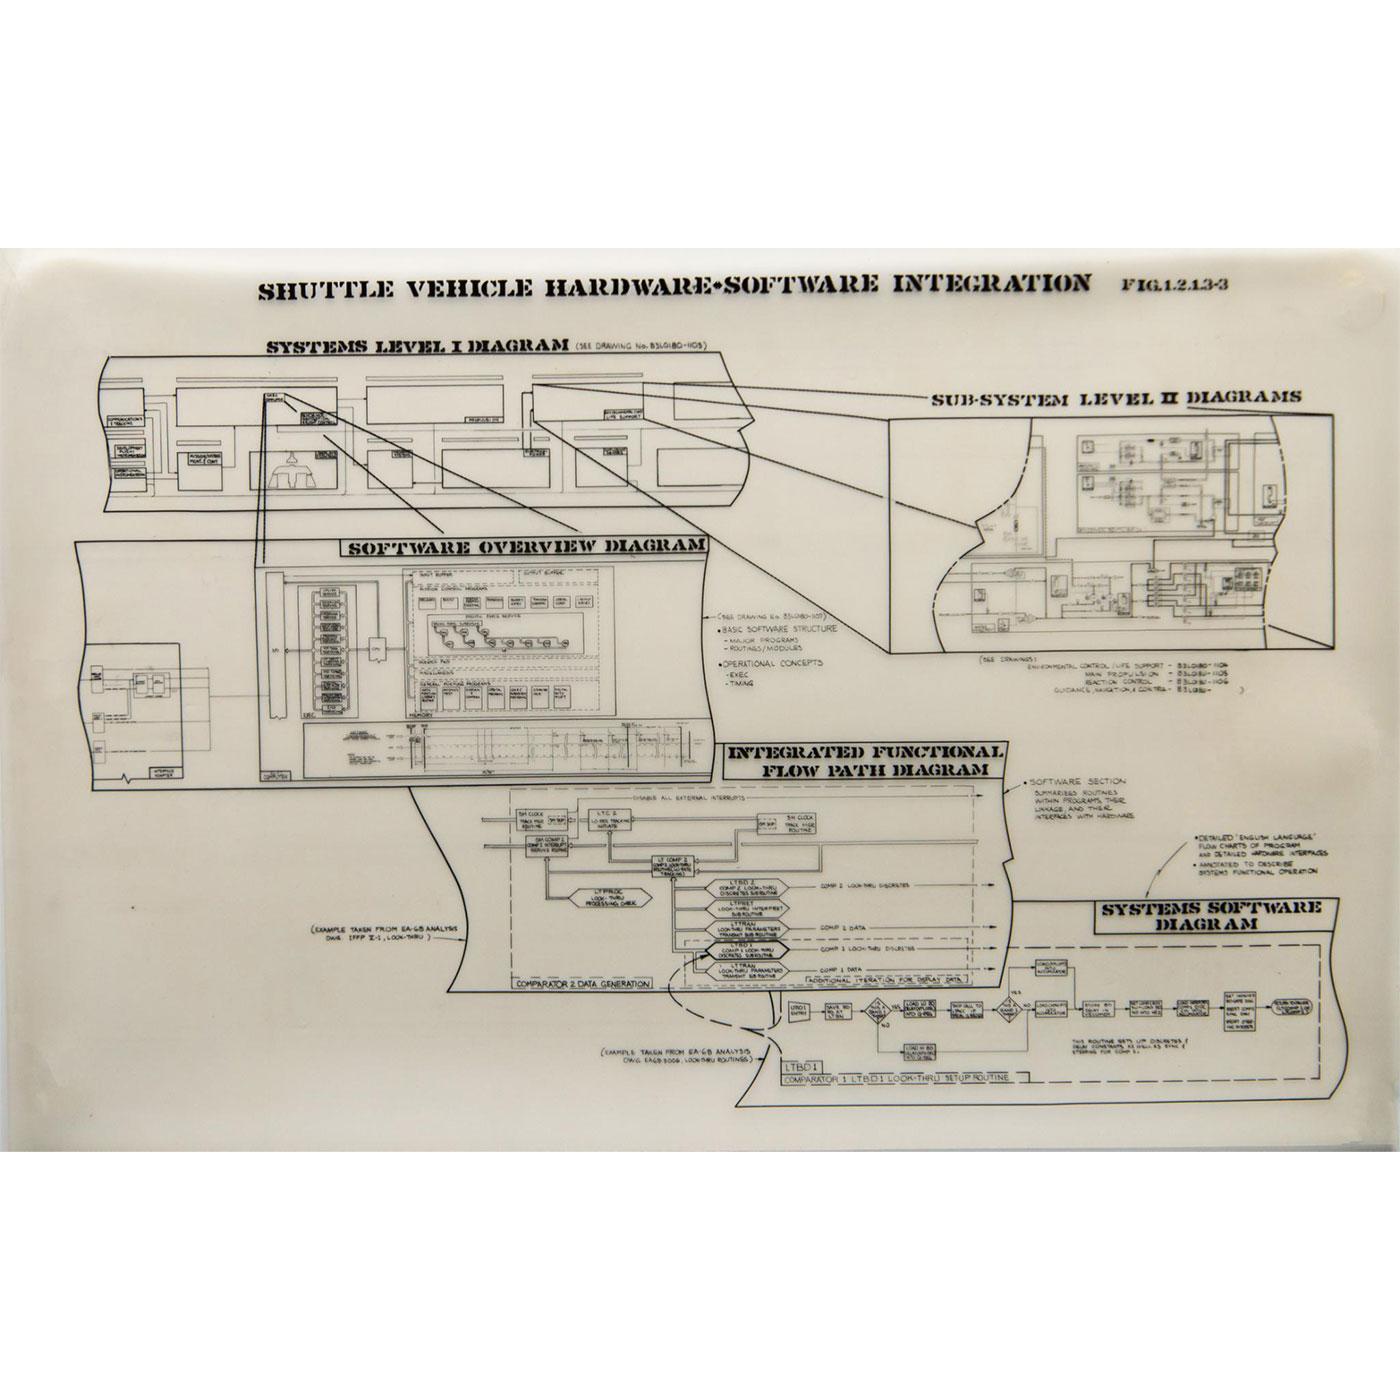 space shuttle technical drawings